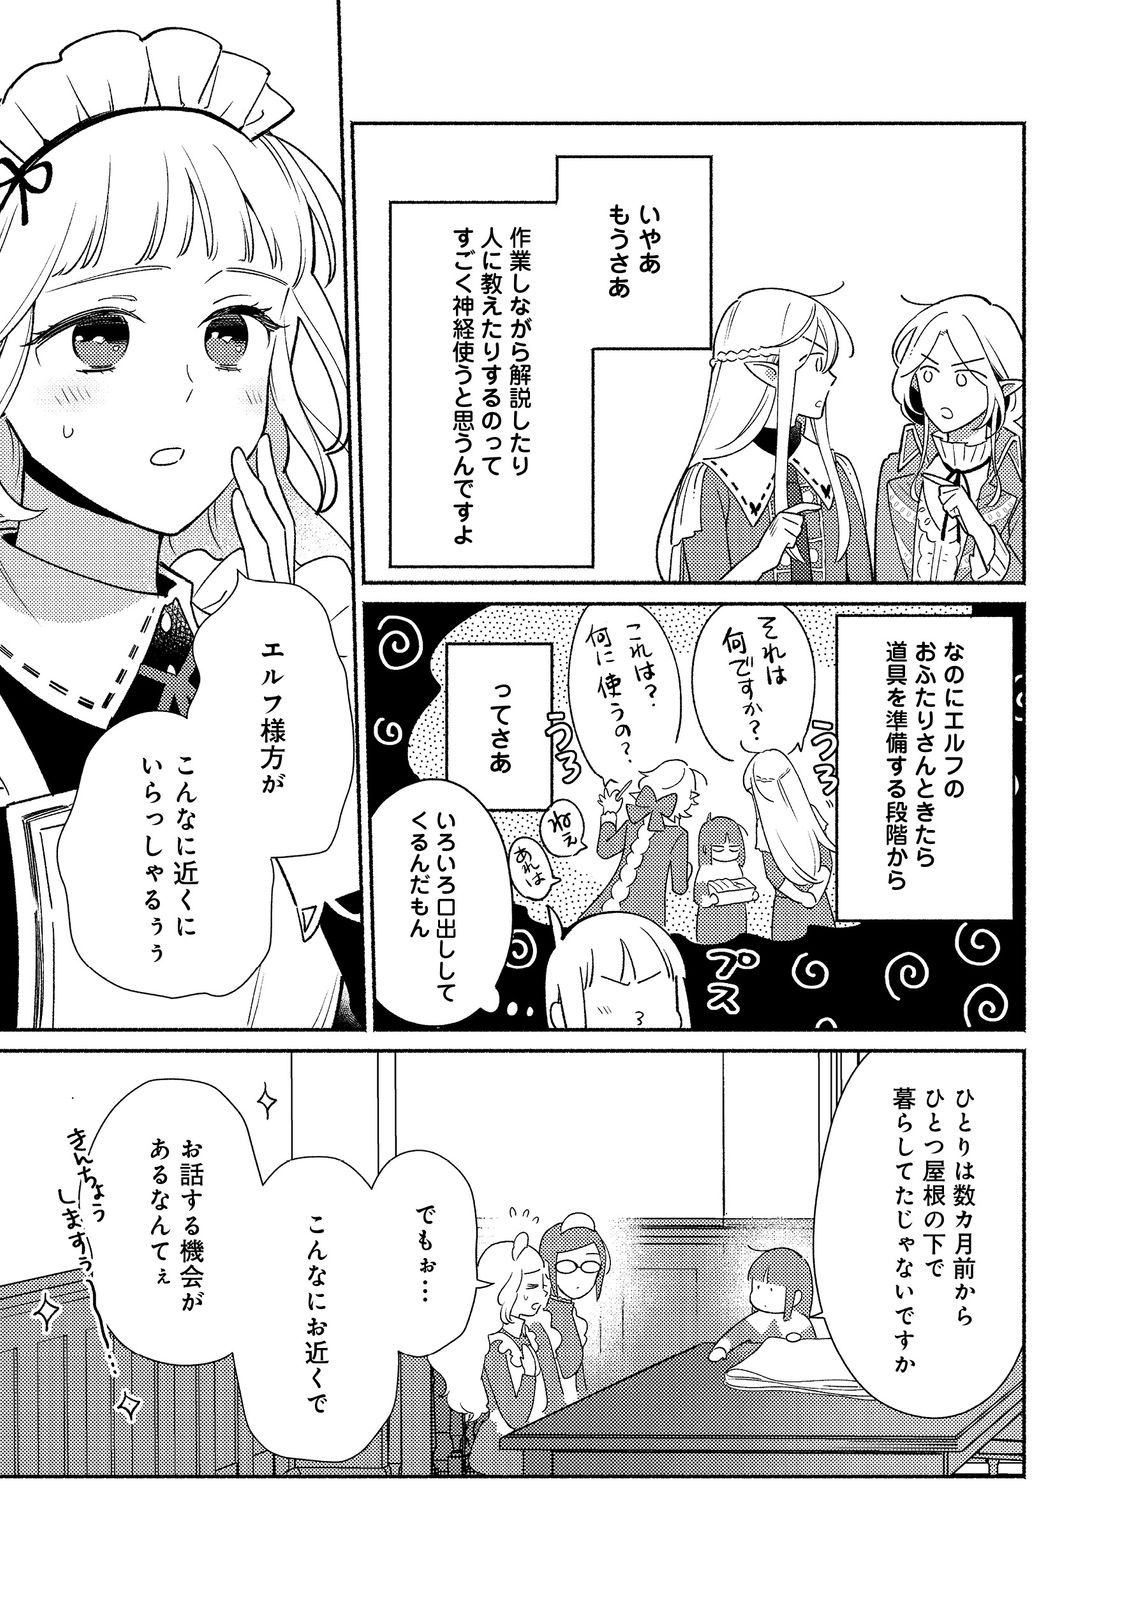 I’m the White Pig Nobleman 第21.1話 - Page 7